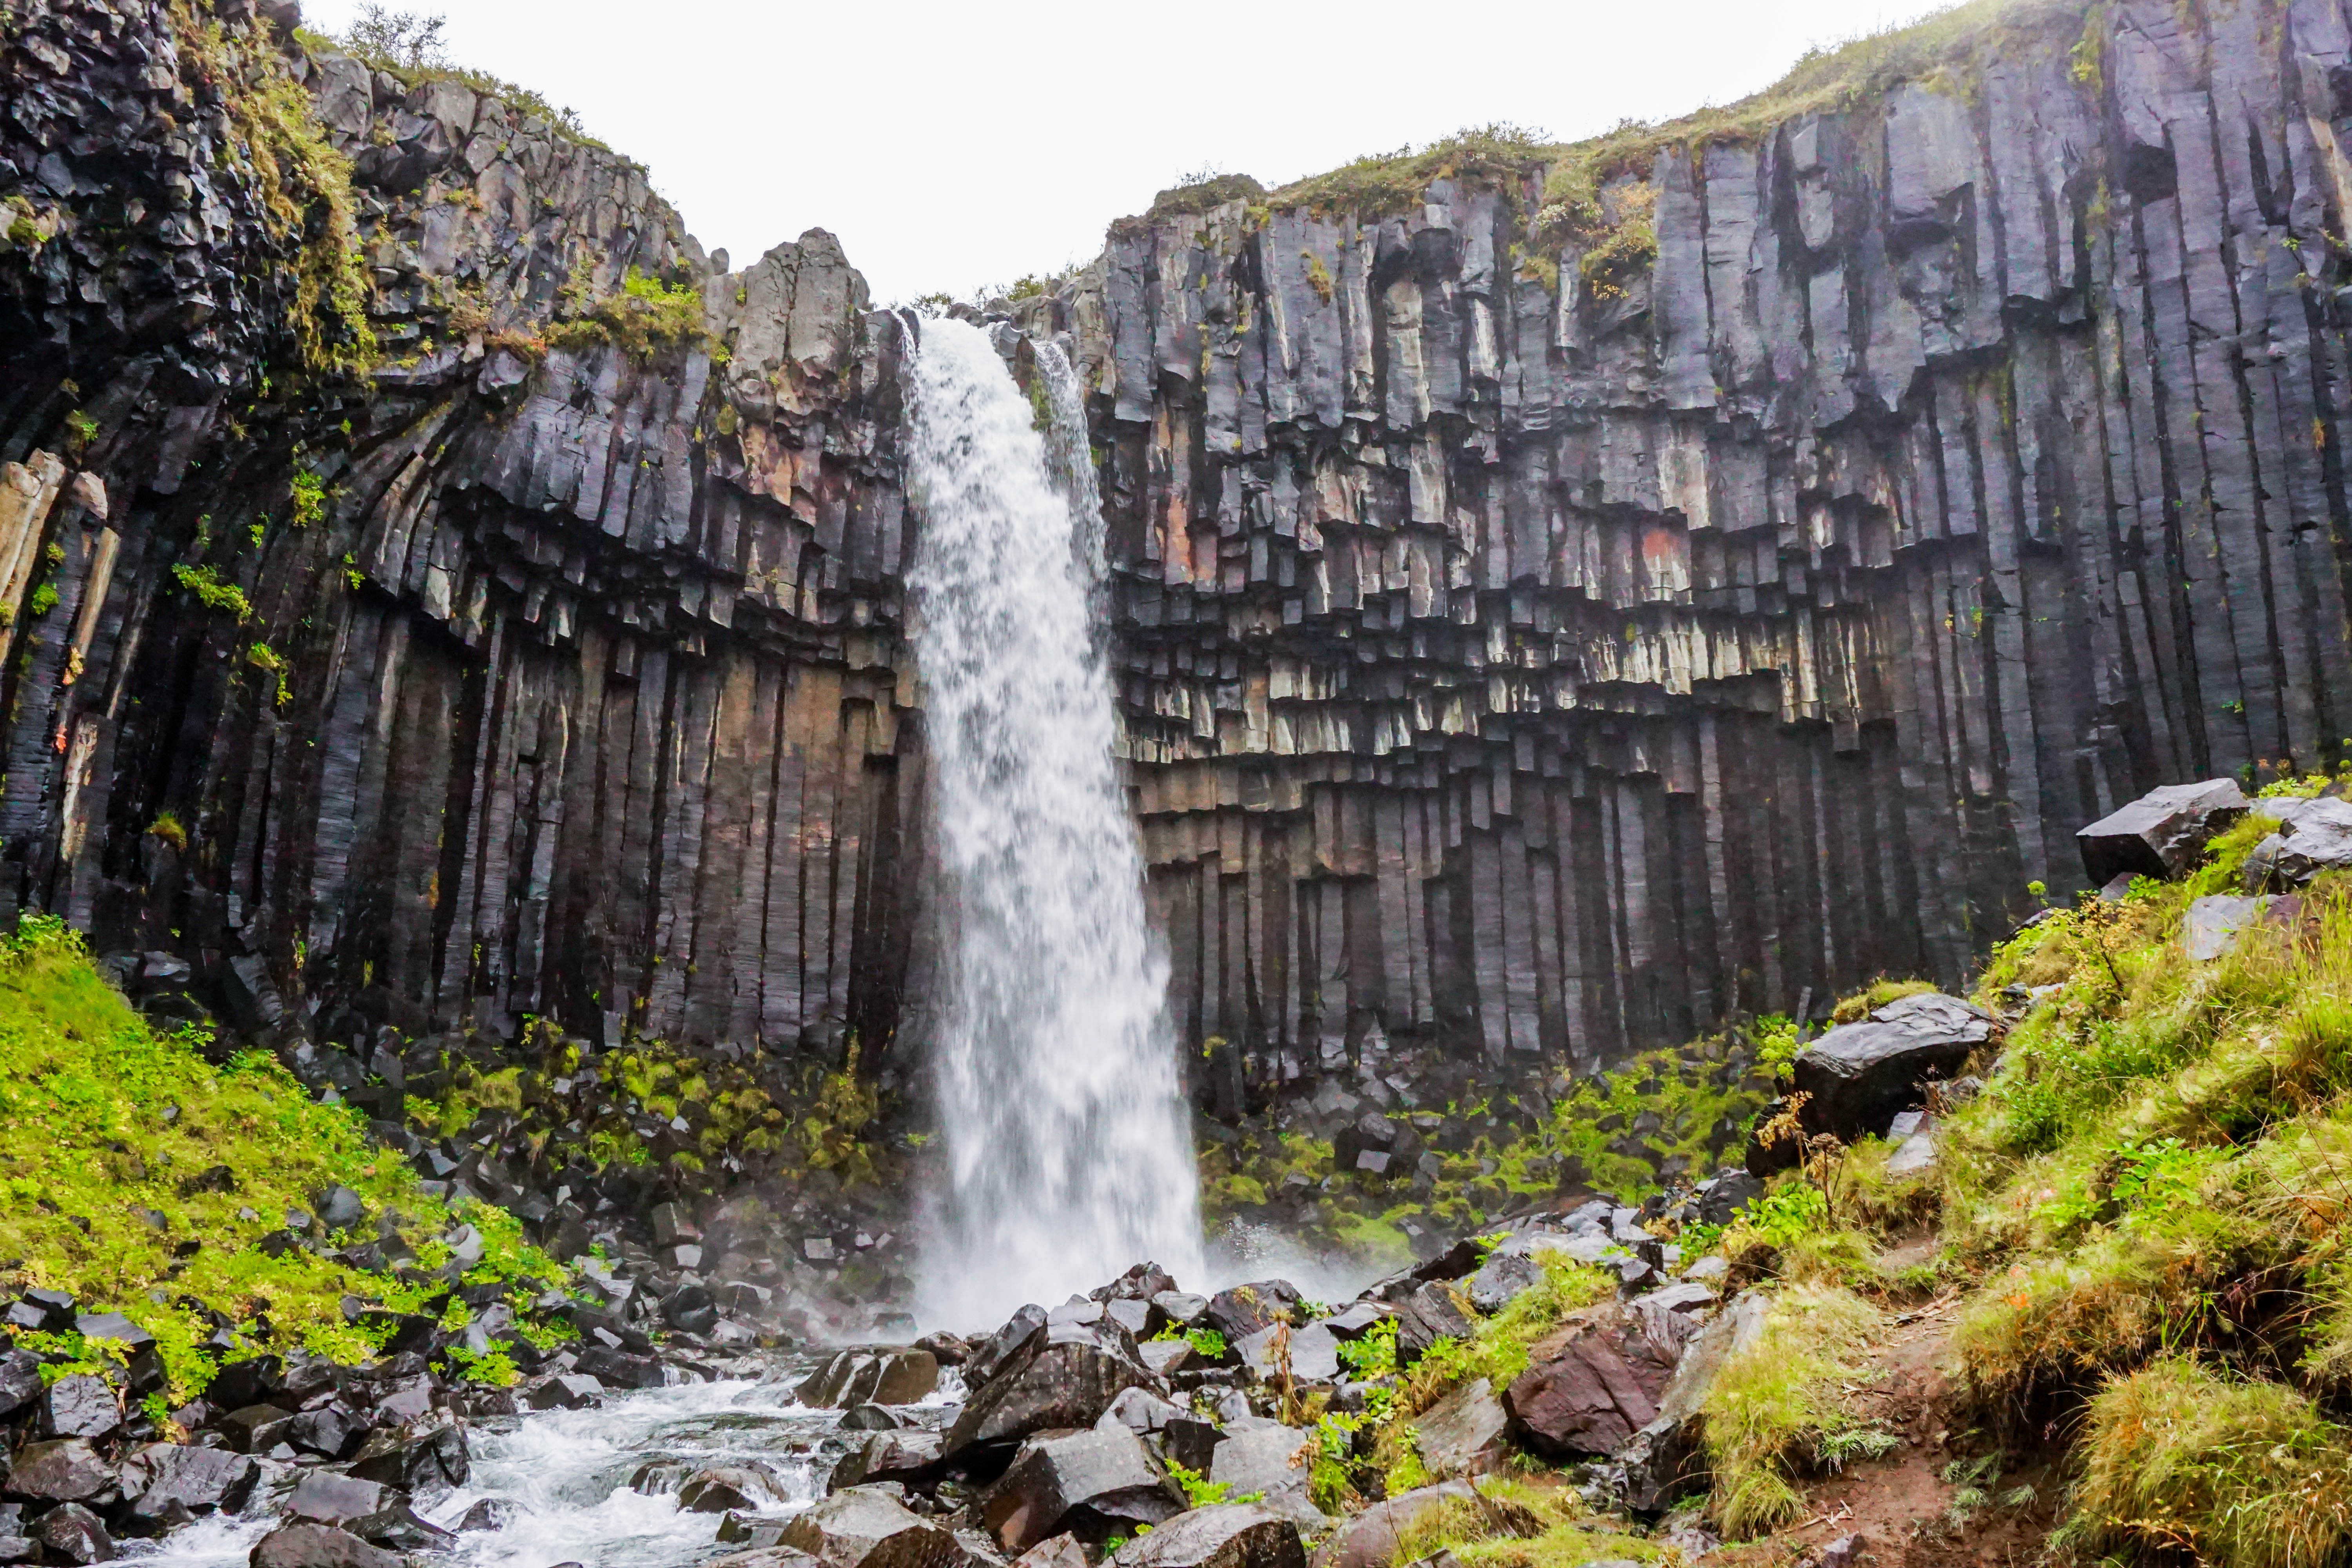 South Iceland must visit places - Skaftafell National park and Svartifoss waterfall // Iceland trip planning made easy with TripCreator.com | Life With a Viwe